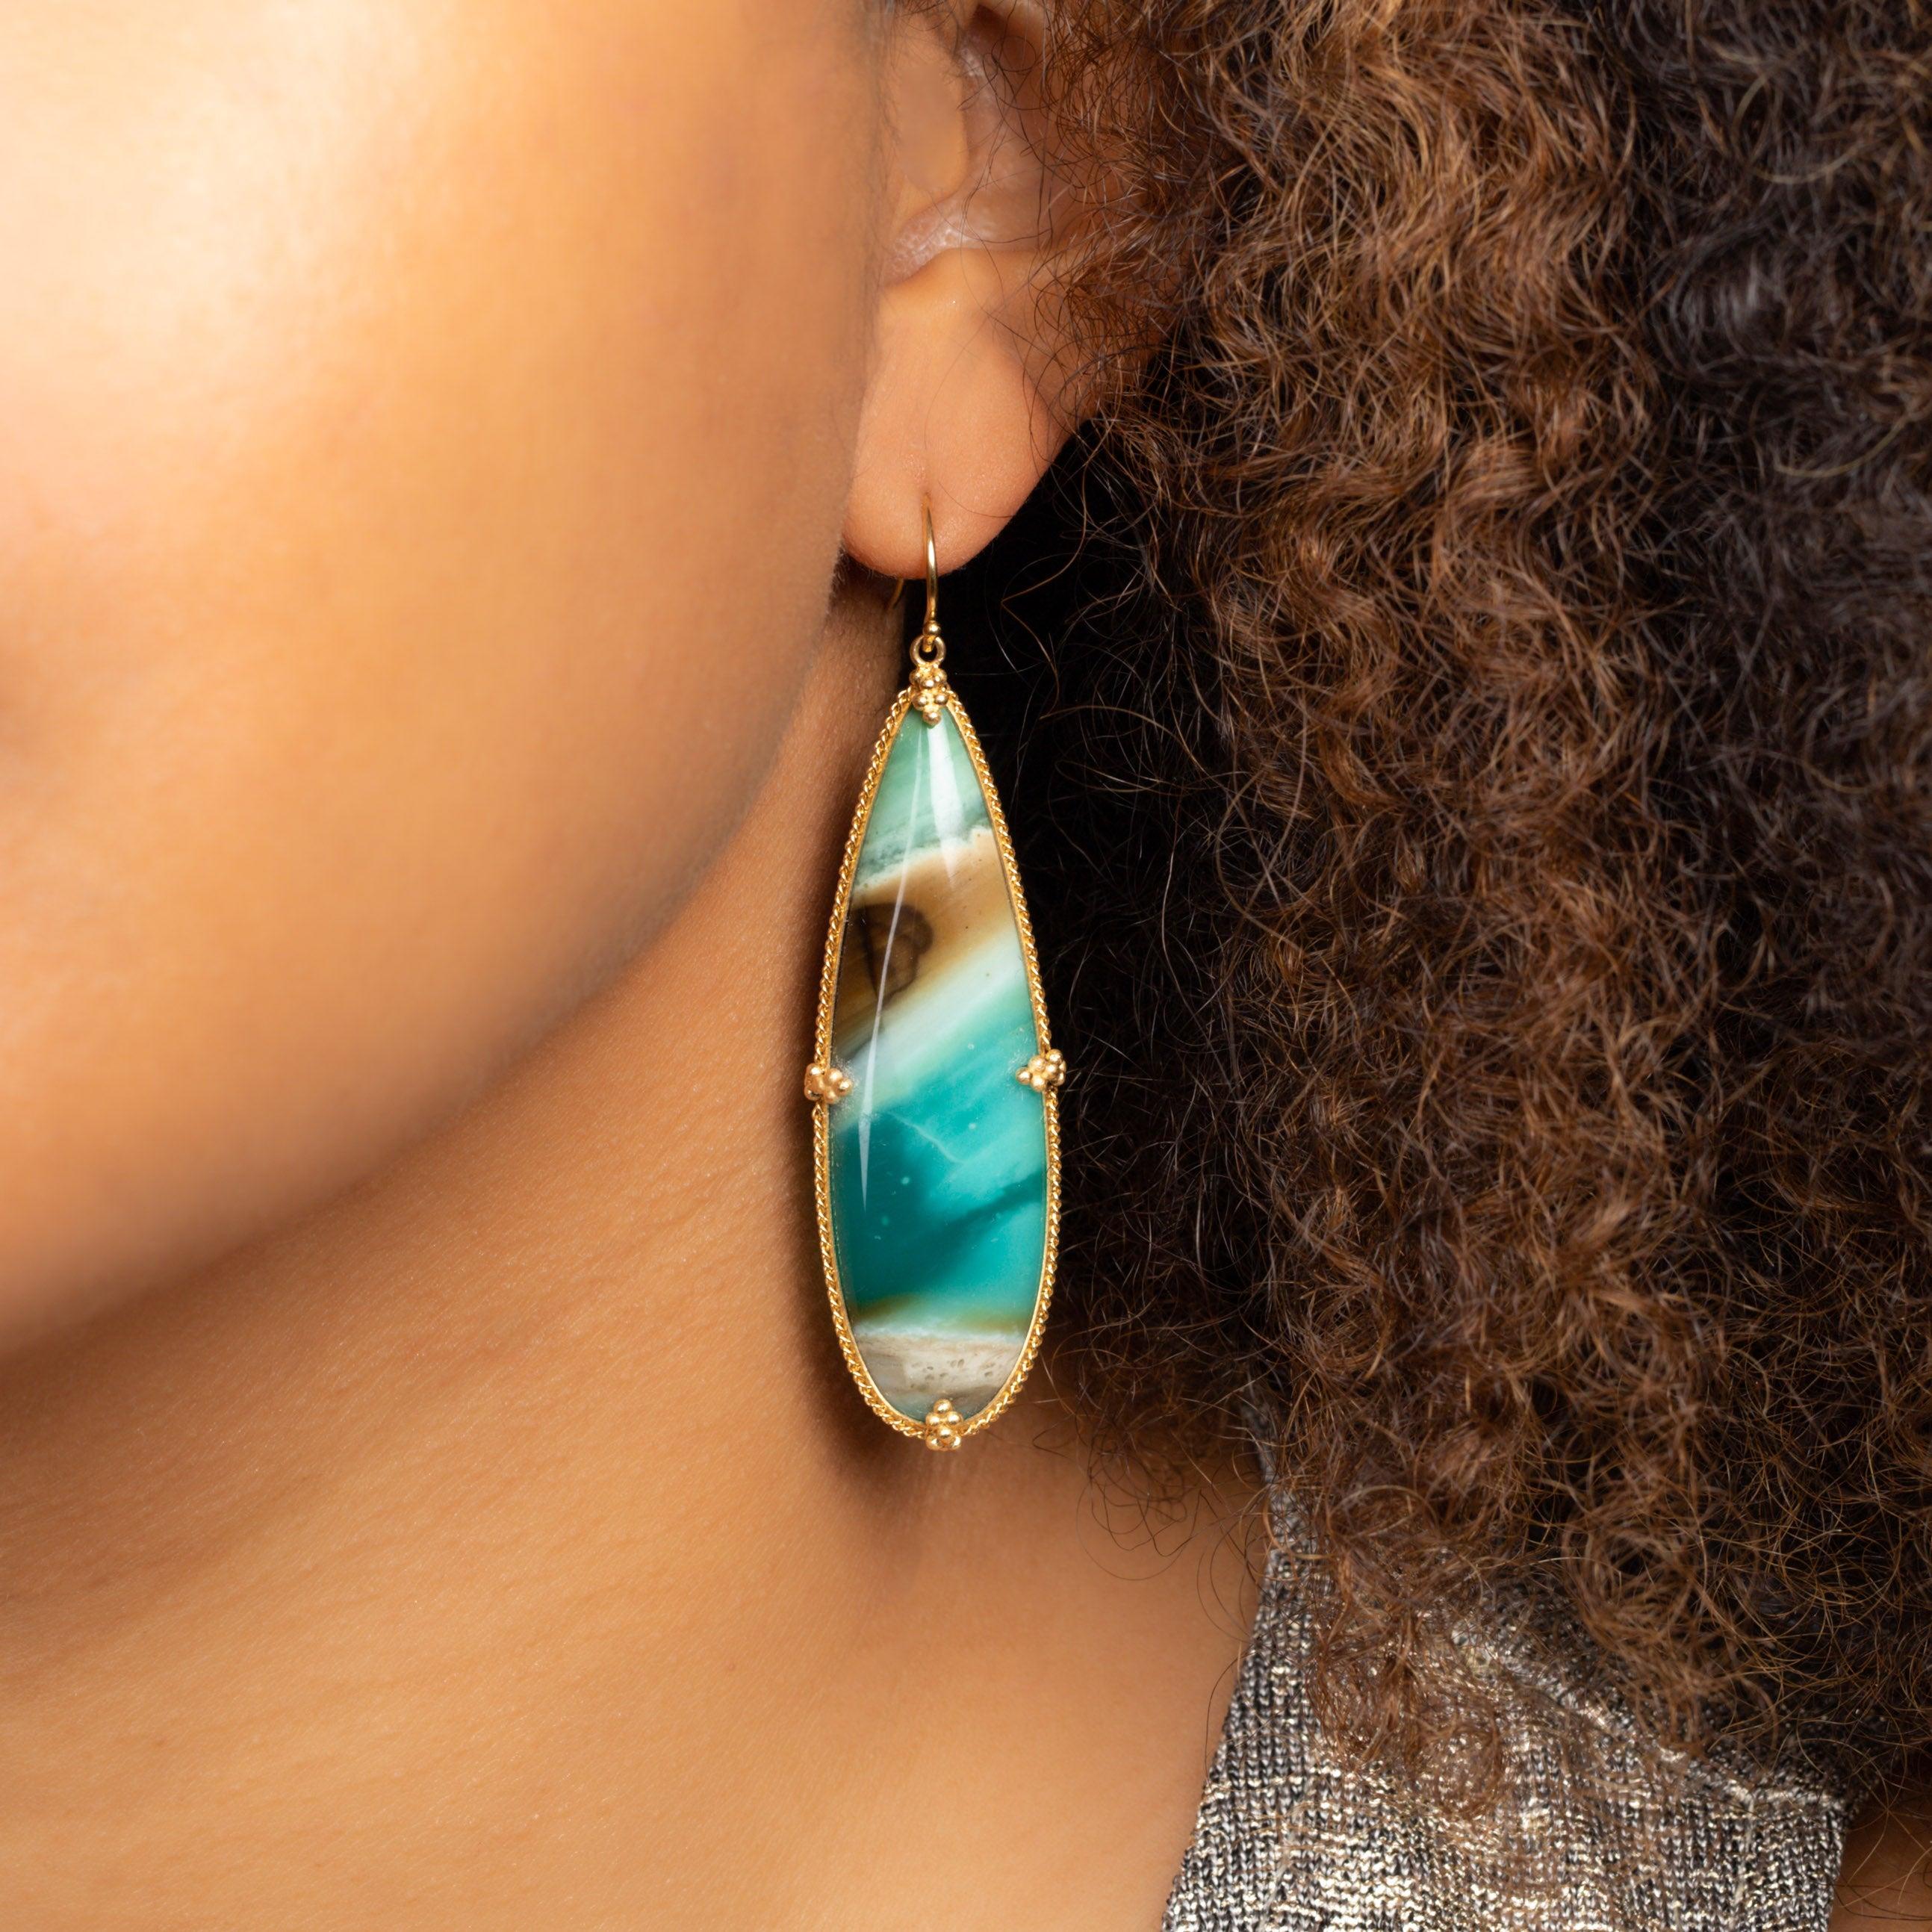 Emerging from a recently-discovered ancient petrified forest on the slopes of Mt. Tjikolak in Indonesia, this magnificent stone has only been in our awareness for the last three years. Like Caribbean waters against hot sand, these earrings are